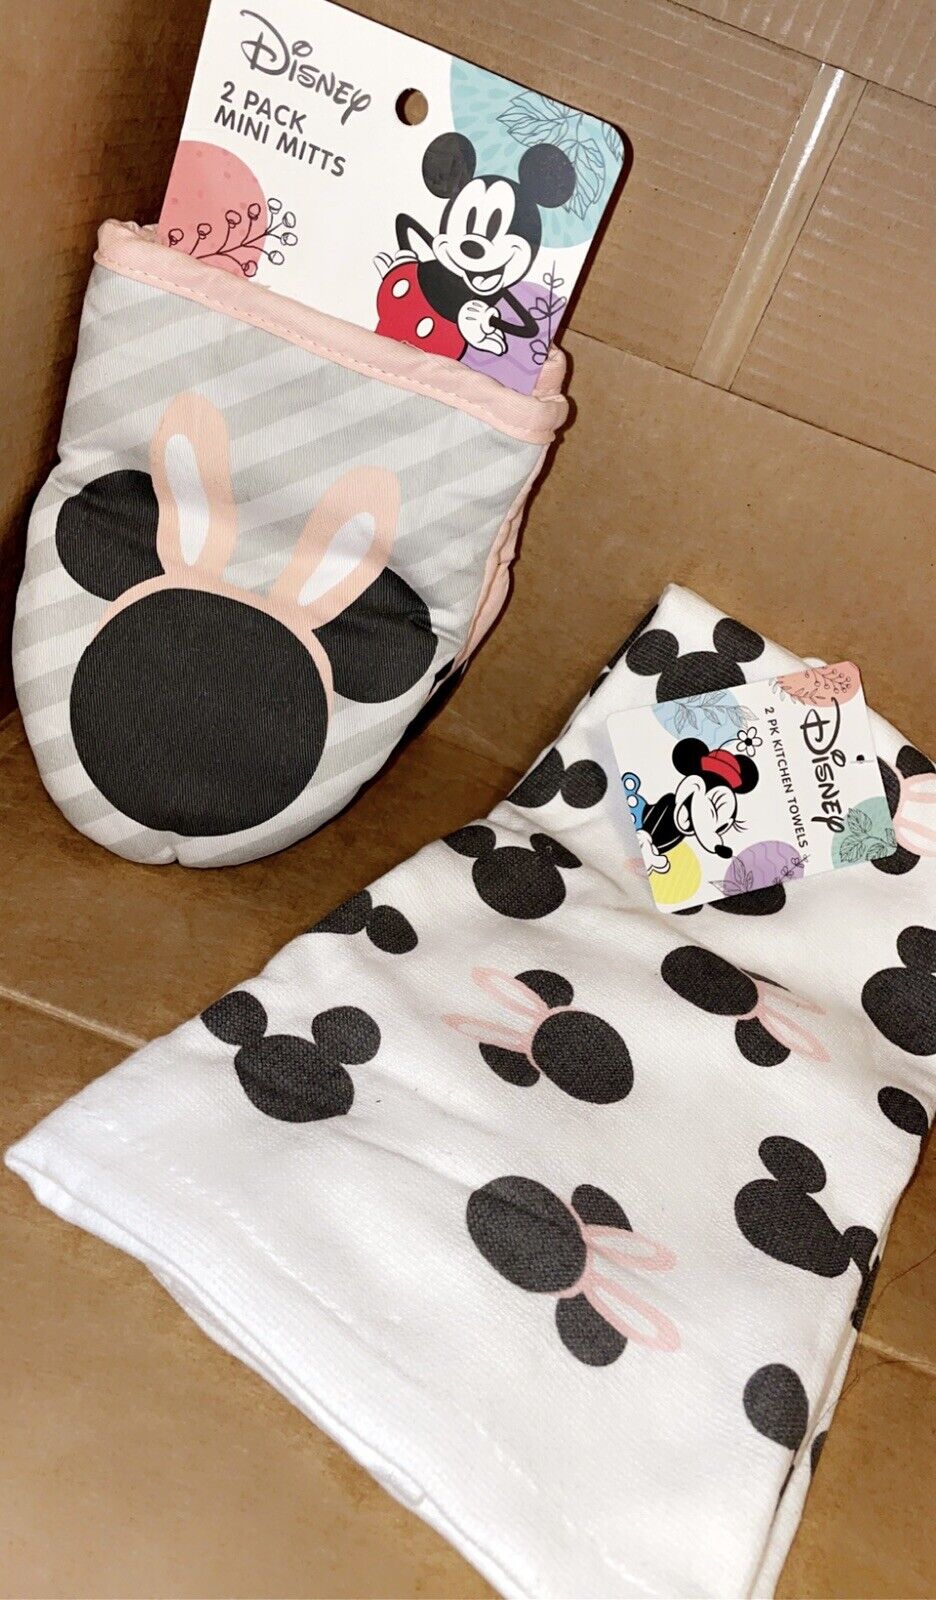 Disney Mickey Mouse Head With Bunny Ears 2 Pack Mini Oven Mitts & kitchen towels